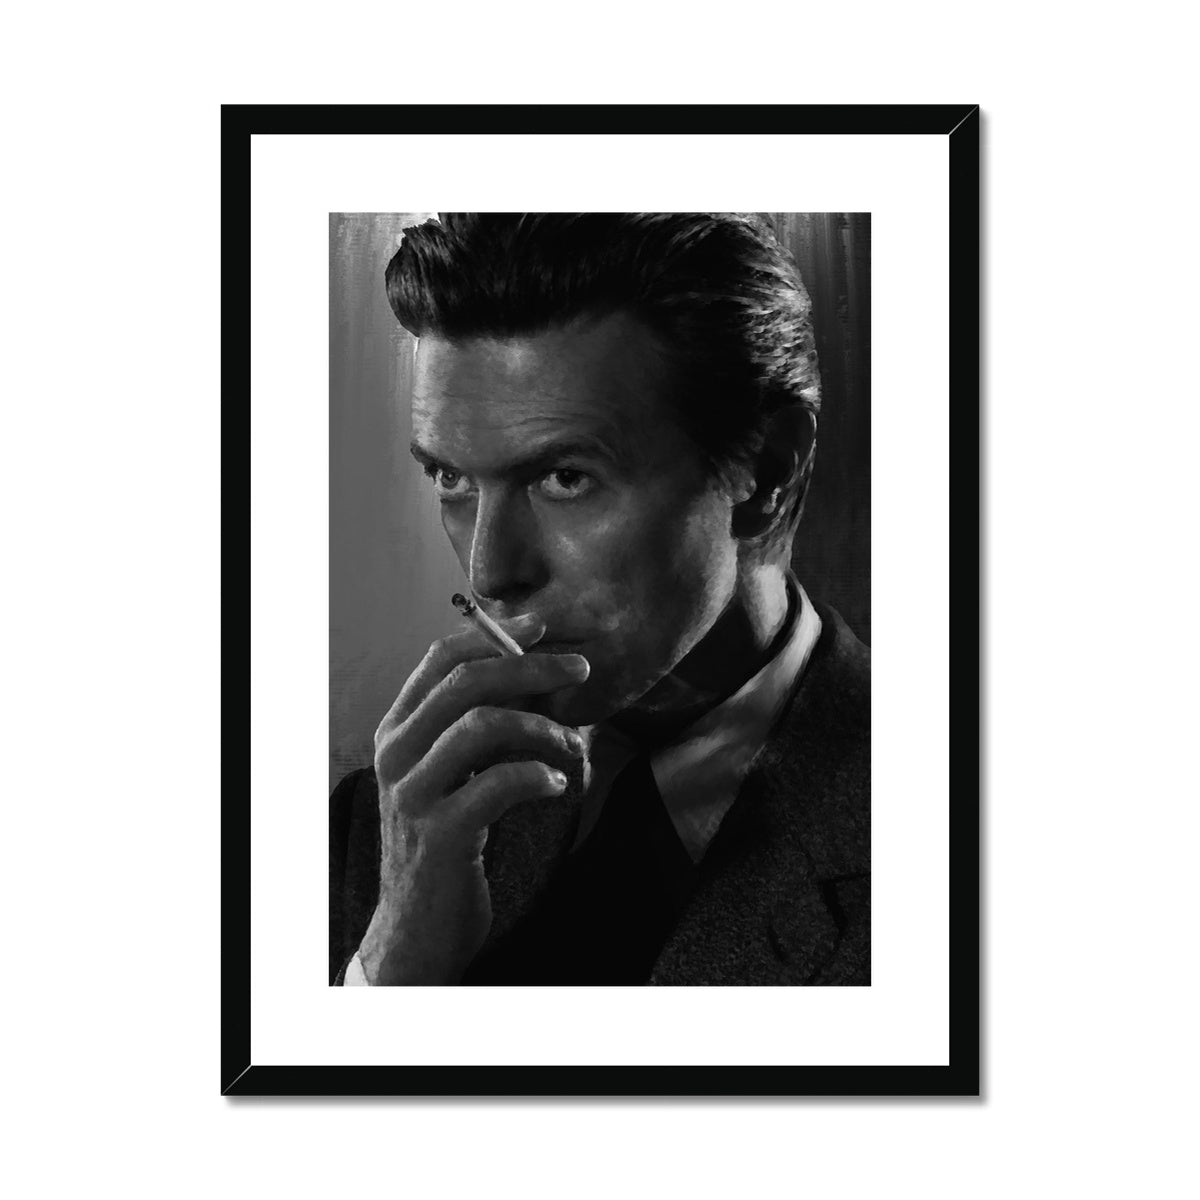 DAVID BOWIE #1 Framed & Mounted Print